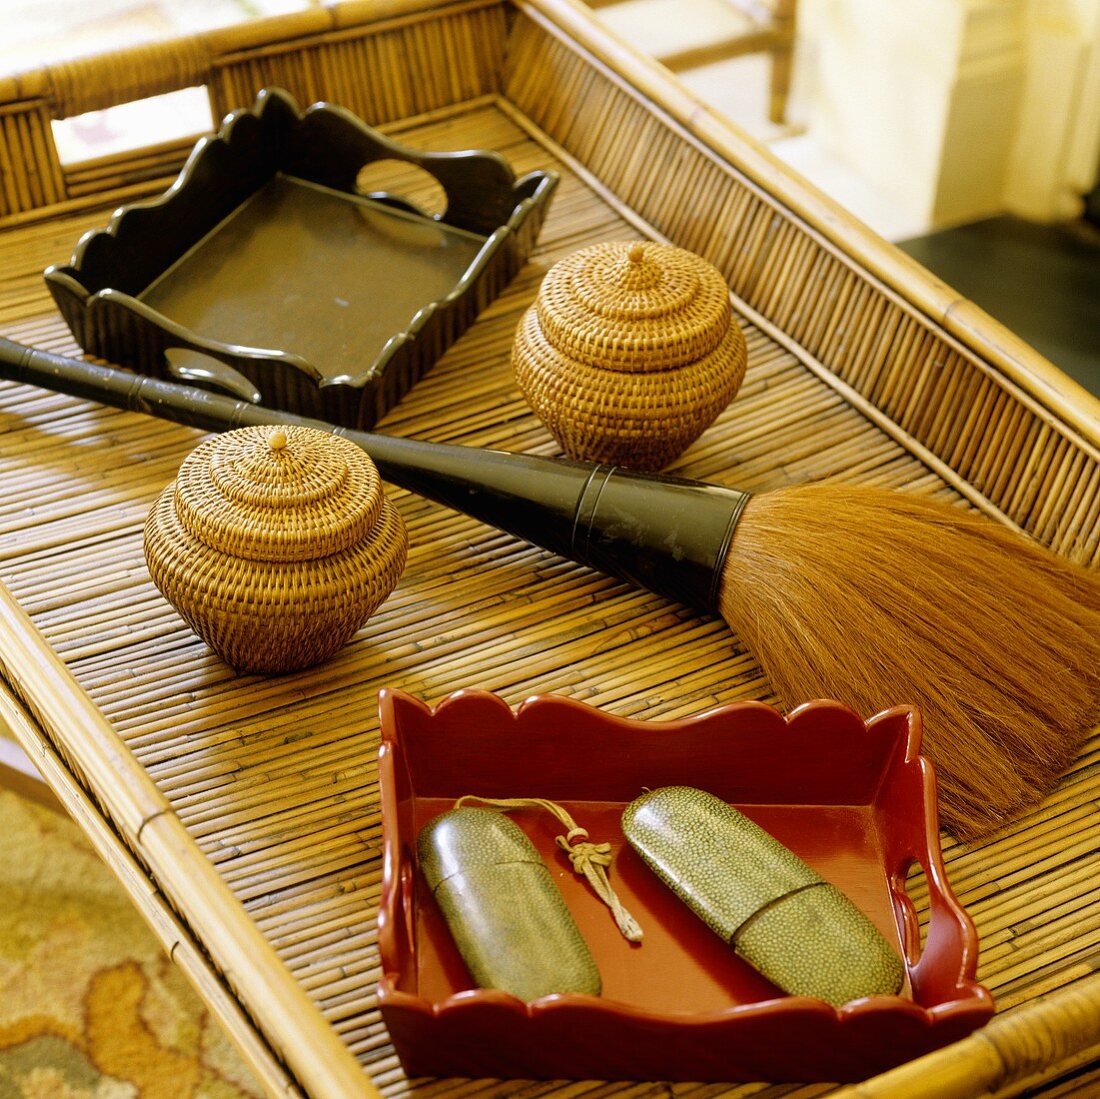 An arrangement on a bamboo tray with a varnished wooden bowl, mini wicker baskets and a bushy brush